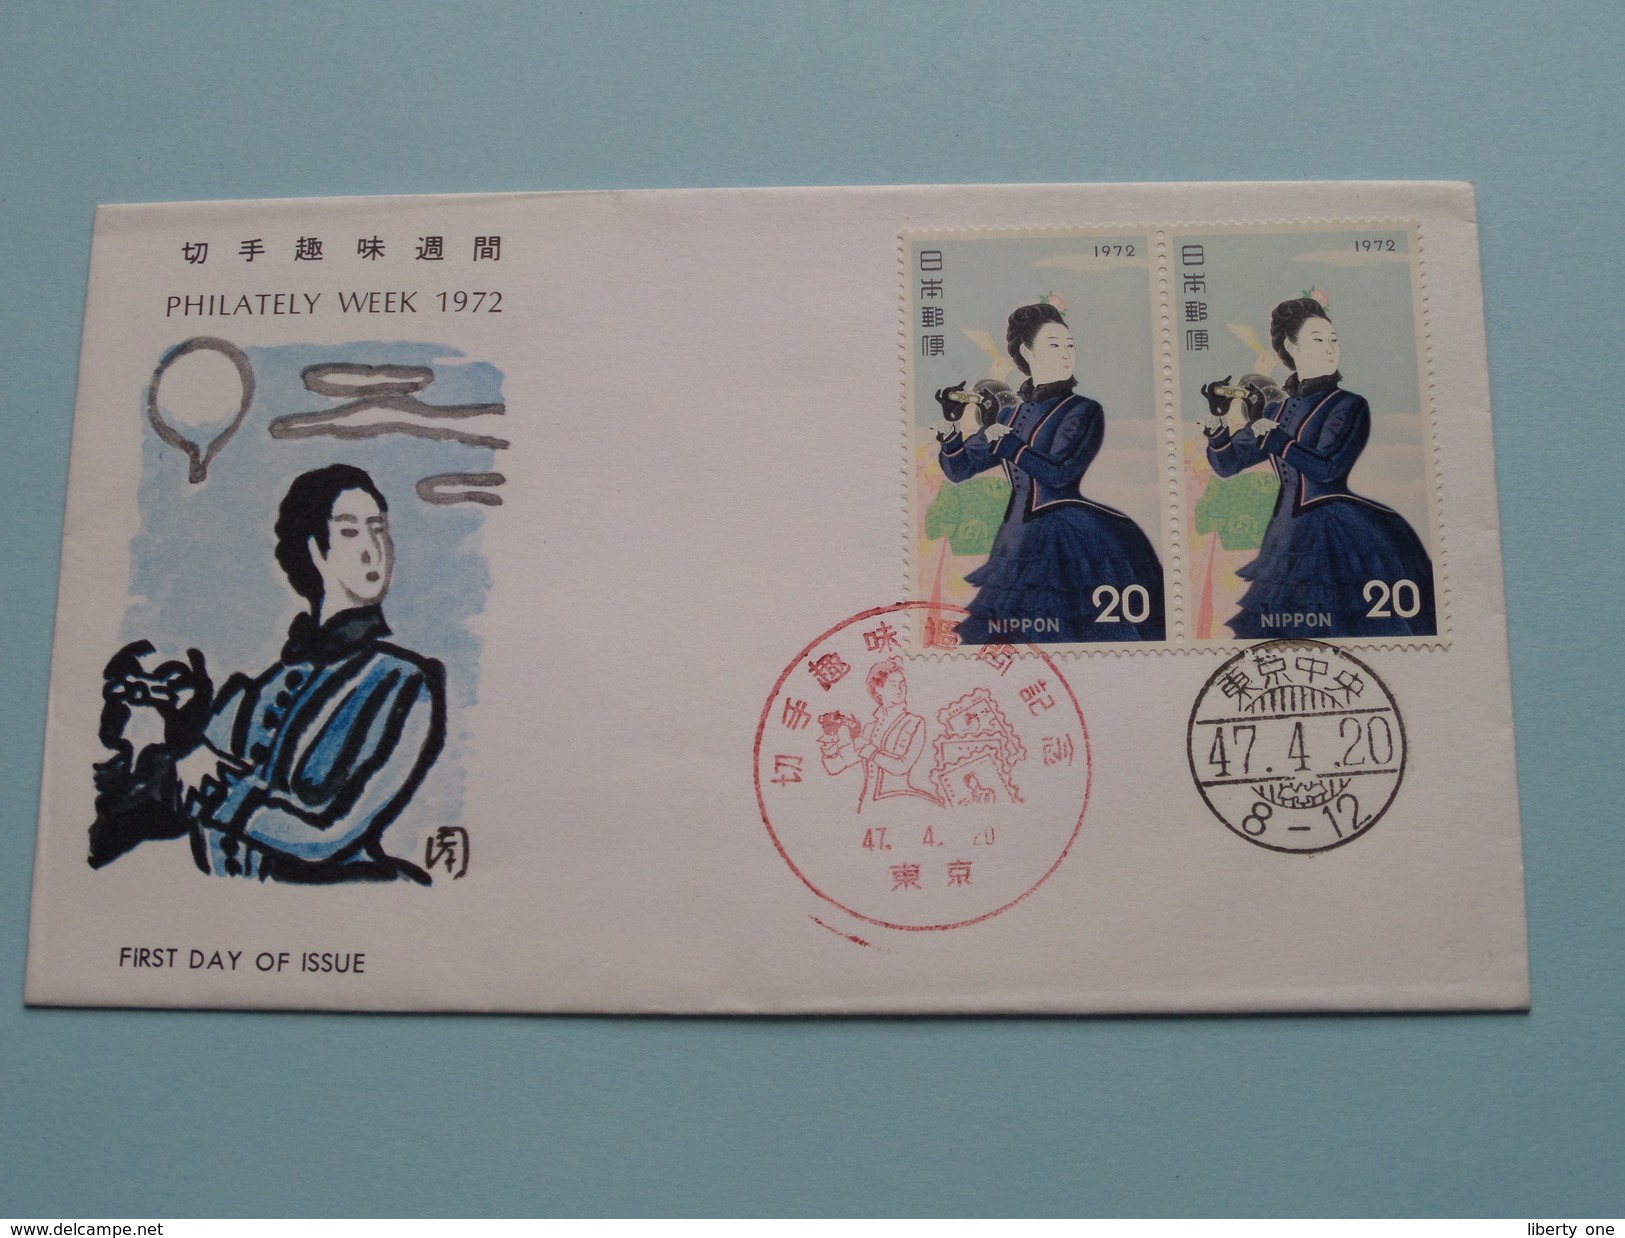 PHILATELY WEEK 1972 / 47-4-20 ( The Society For Promotion Of Philately ) ! - FDC